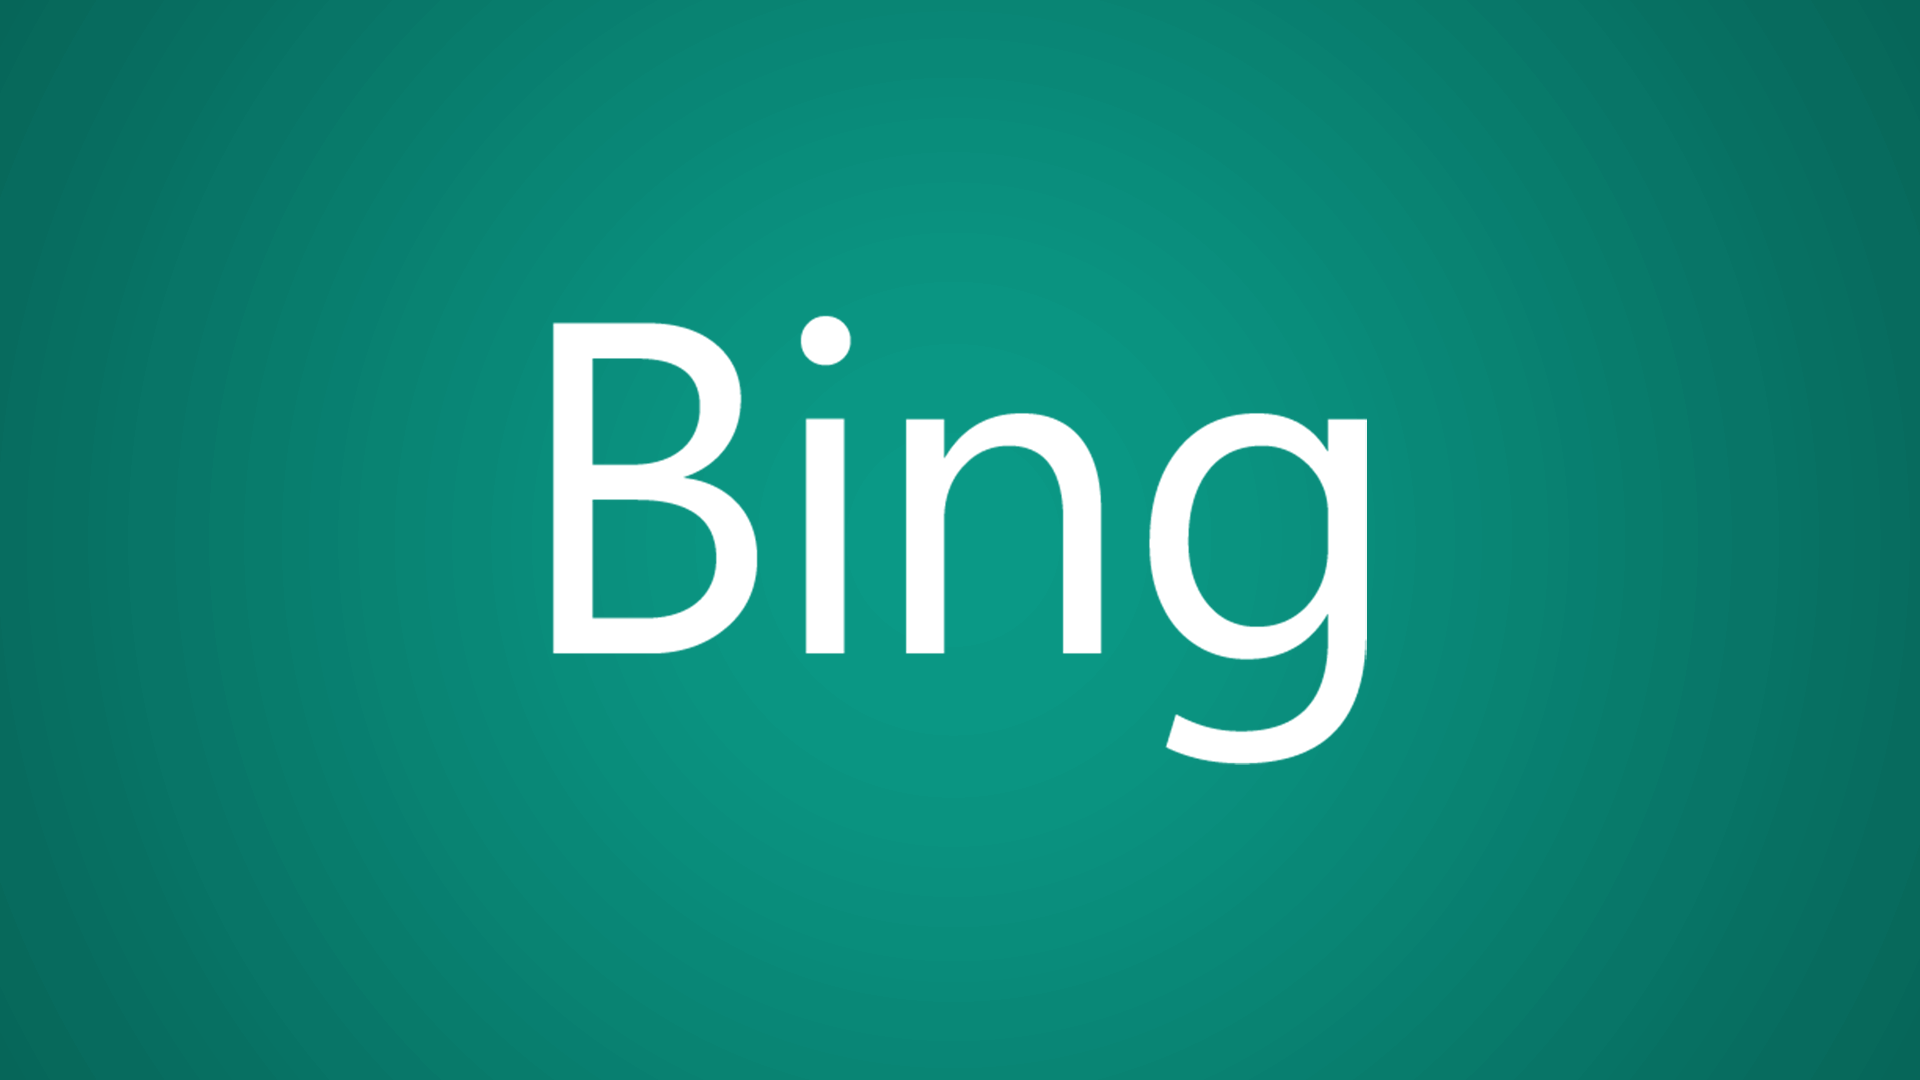 Bing Apps Logo - Bing Ads starts testing app install ads in the US - Search Engine Land